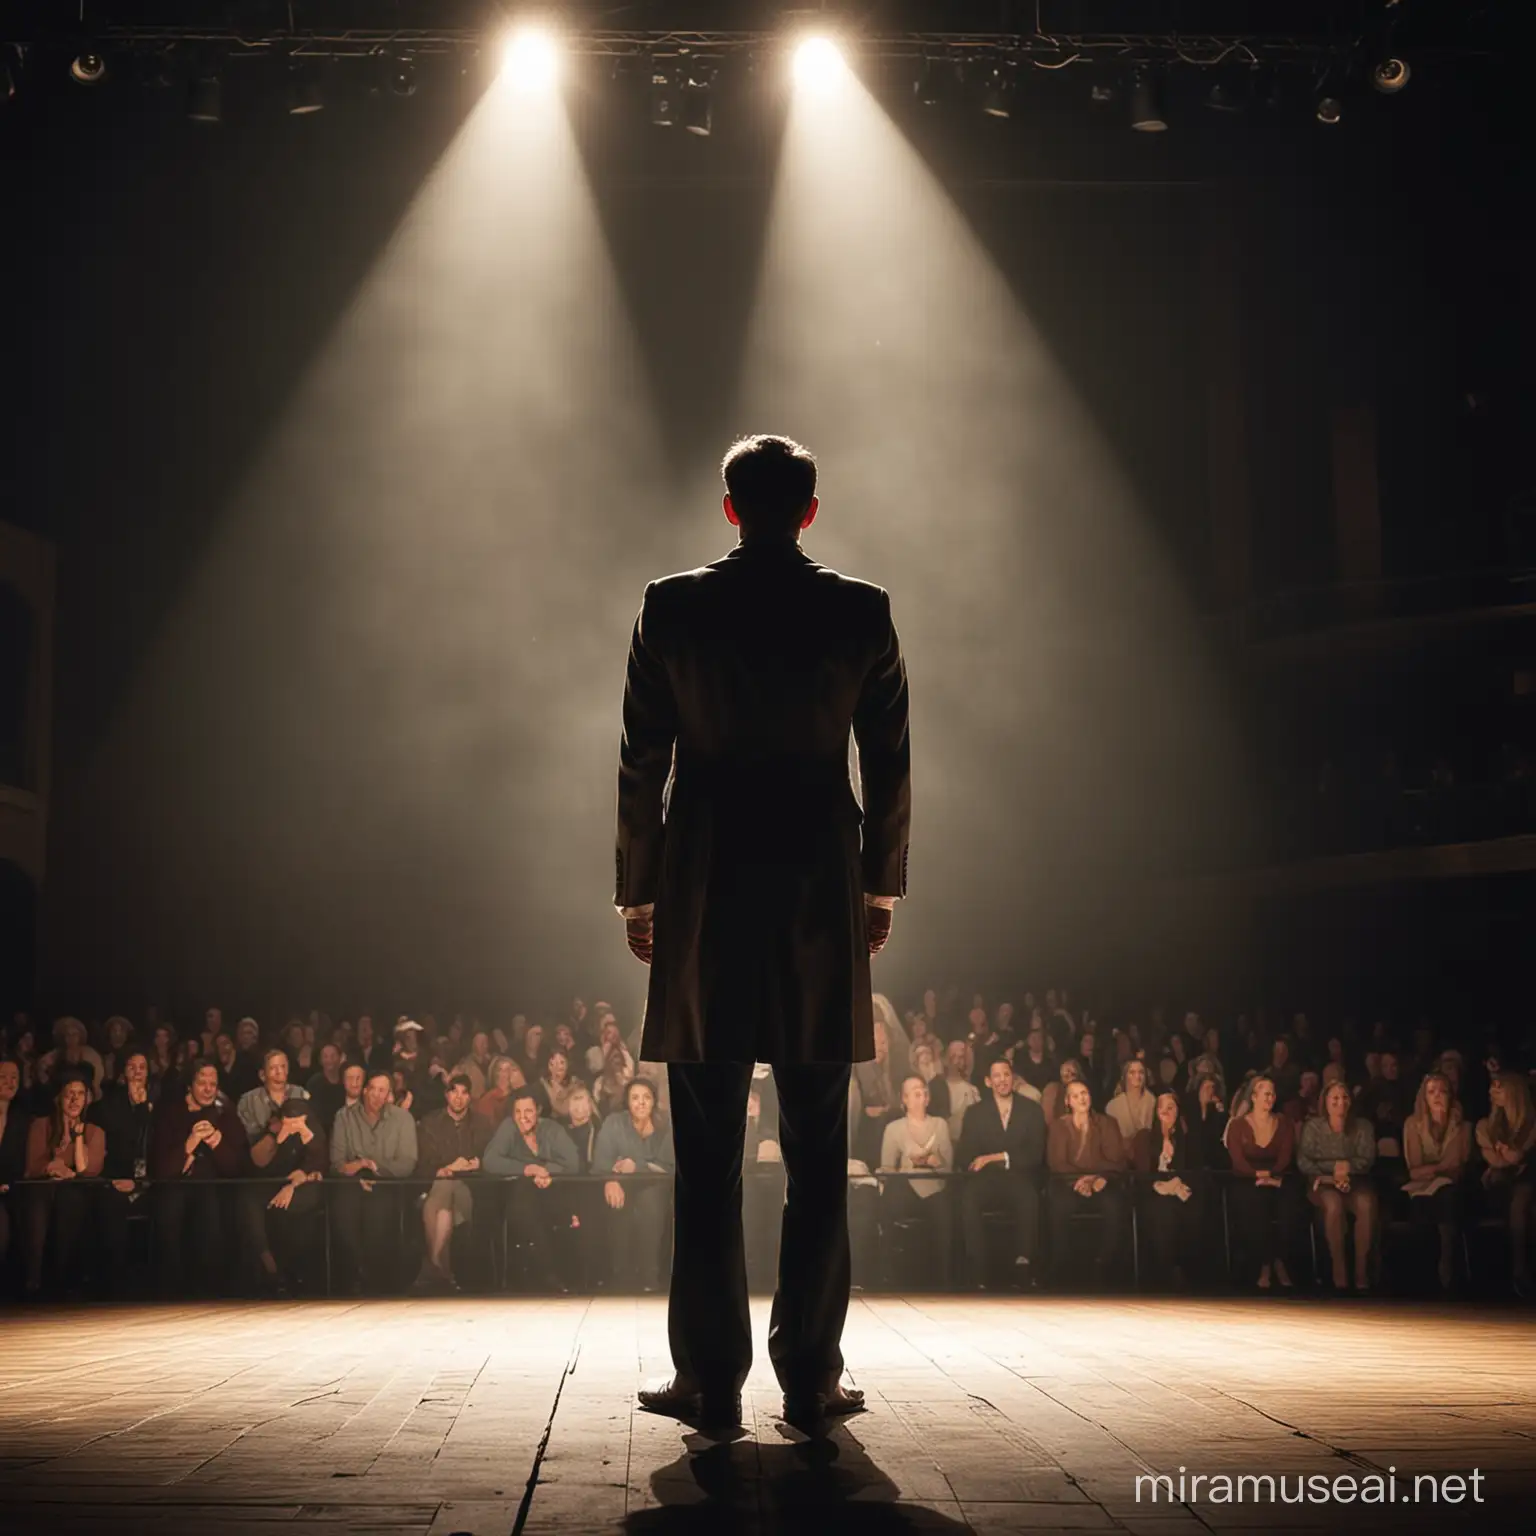 Theatre Actor Standing on Stage Under Spotlight Facing Audience